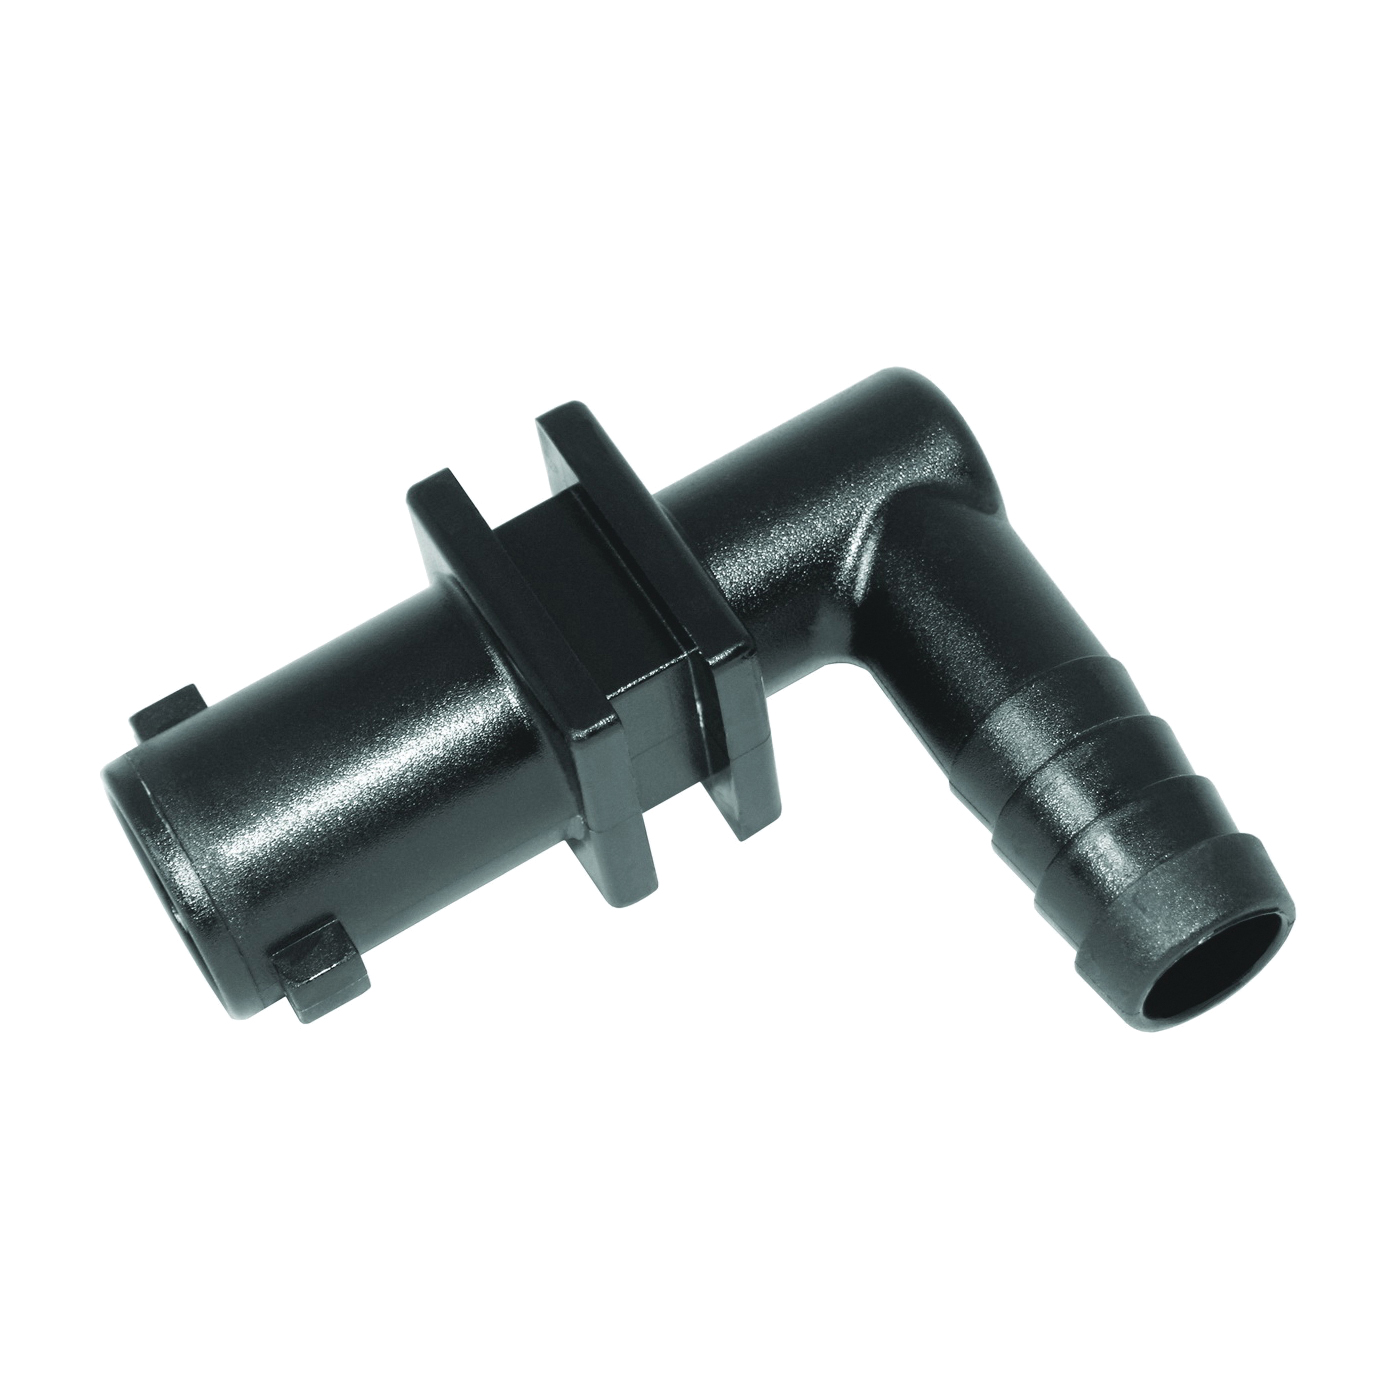 Y8231003 Dry Boom Nozzle Body Elbow, 1/2 in, Quick x Hose Barb, 7 psi Pressure, EPDM Rubber